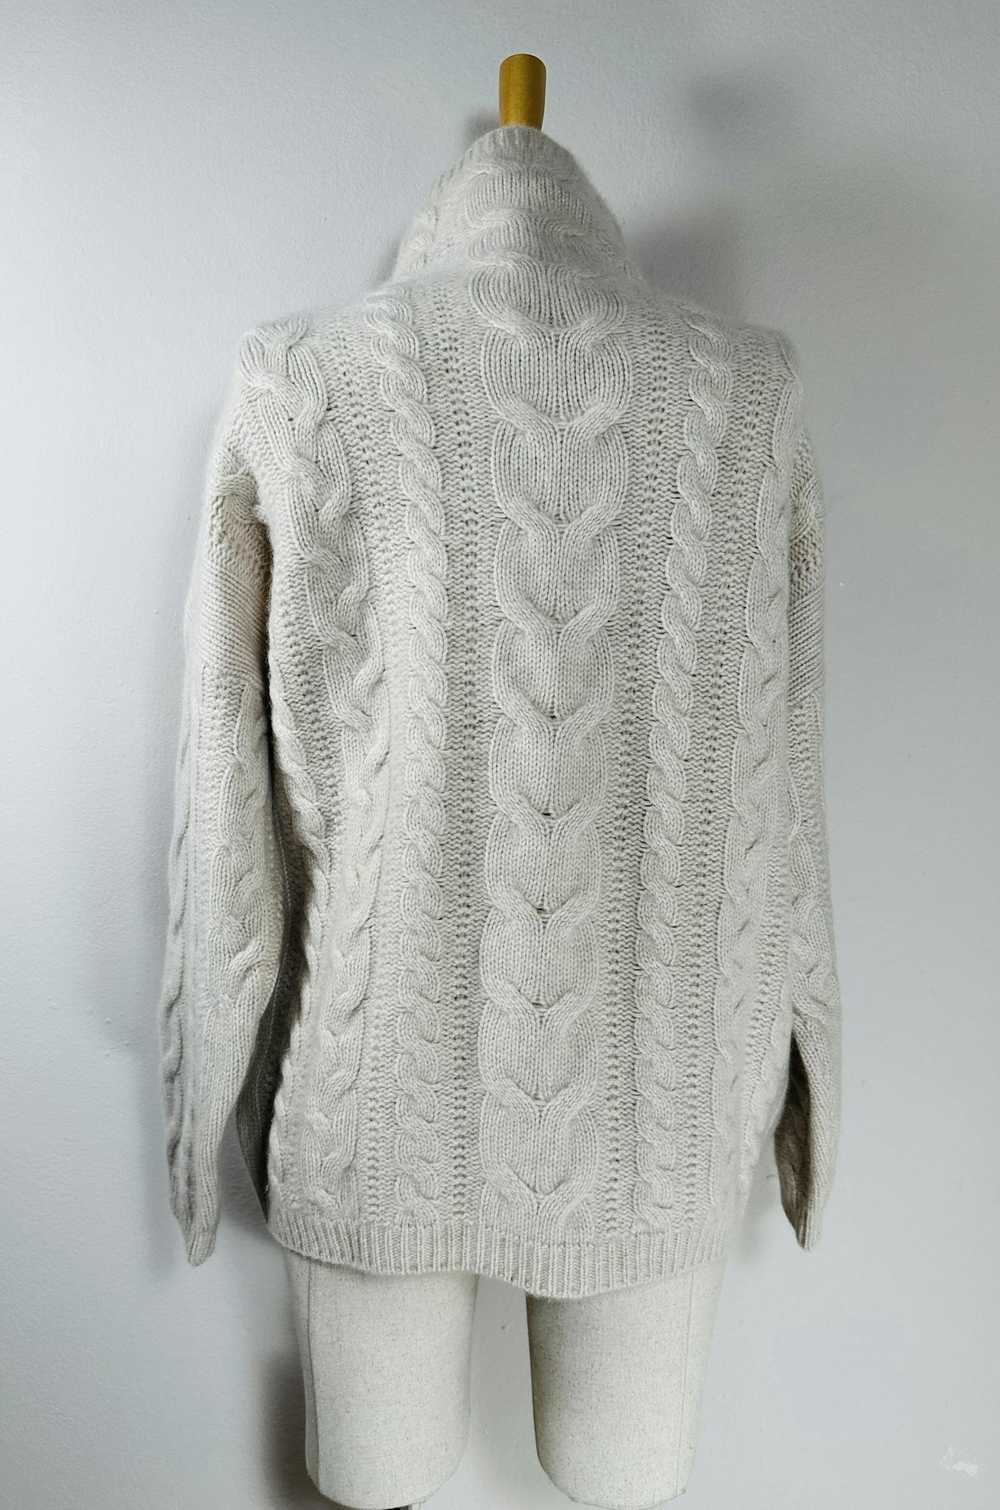 Cashmere & Wool Repeat white cashmere sweater - image 3